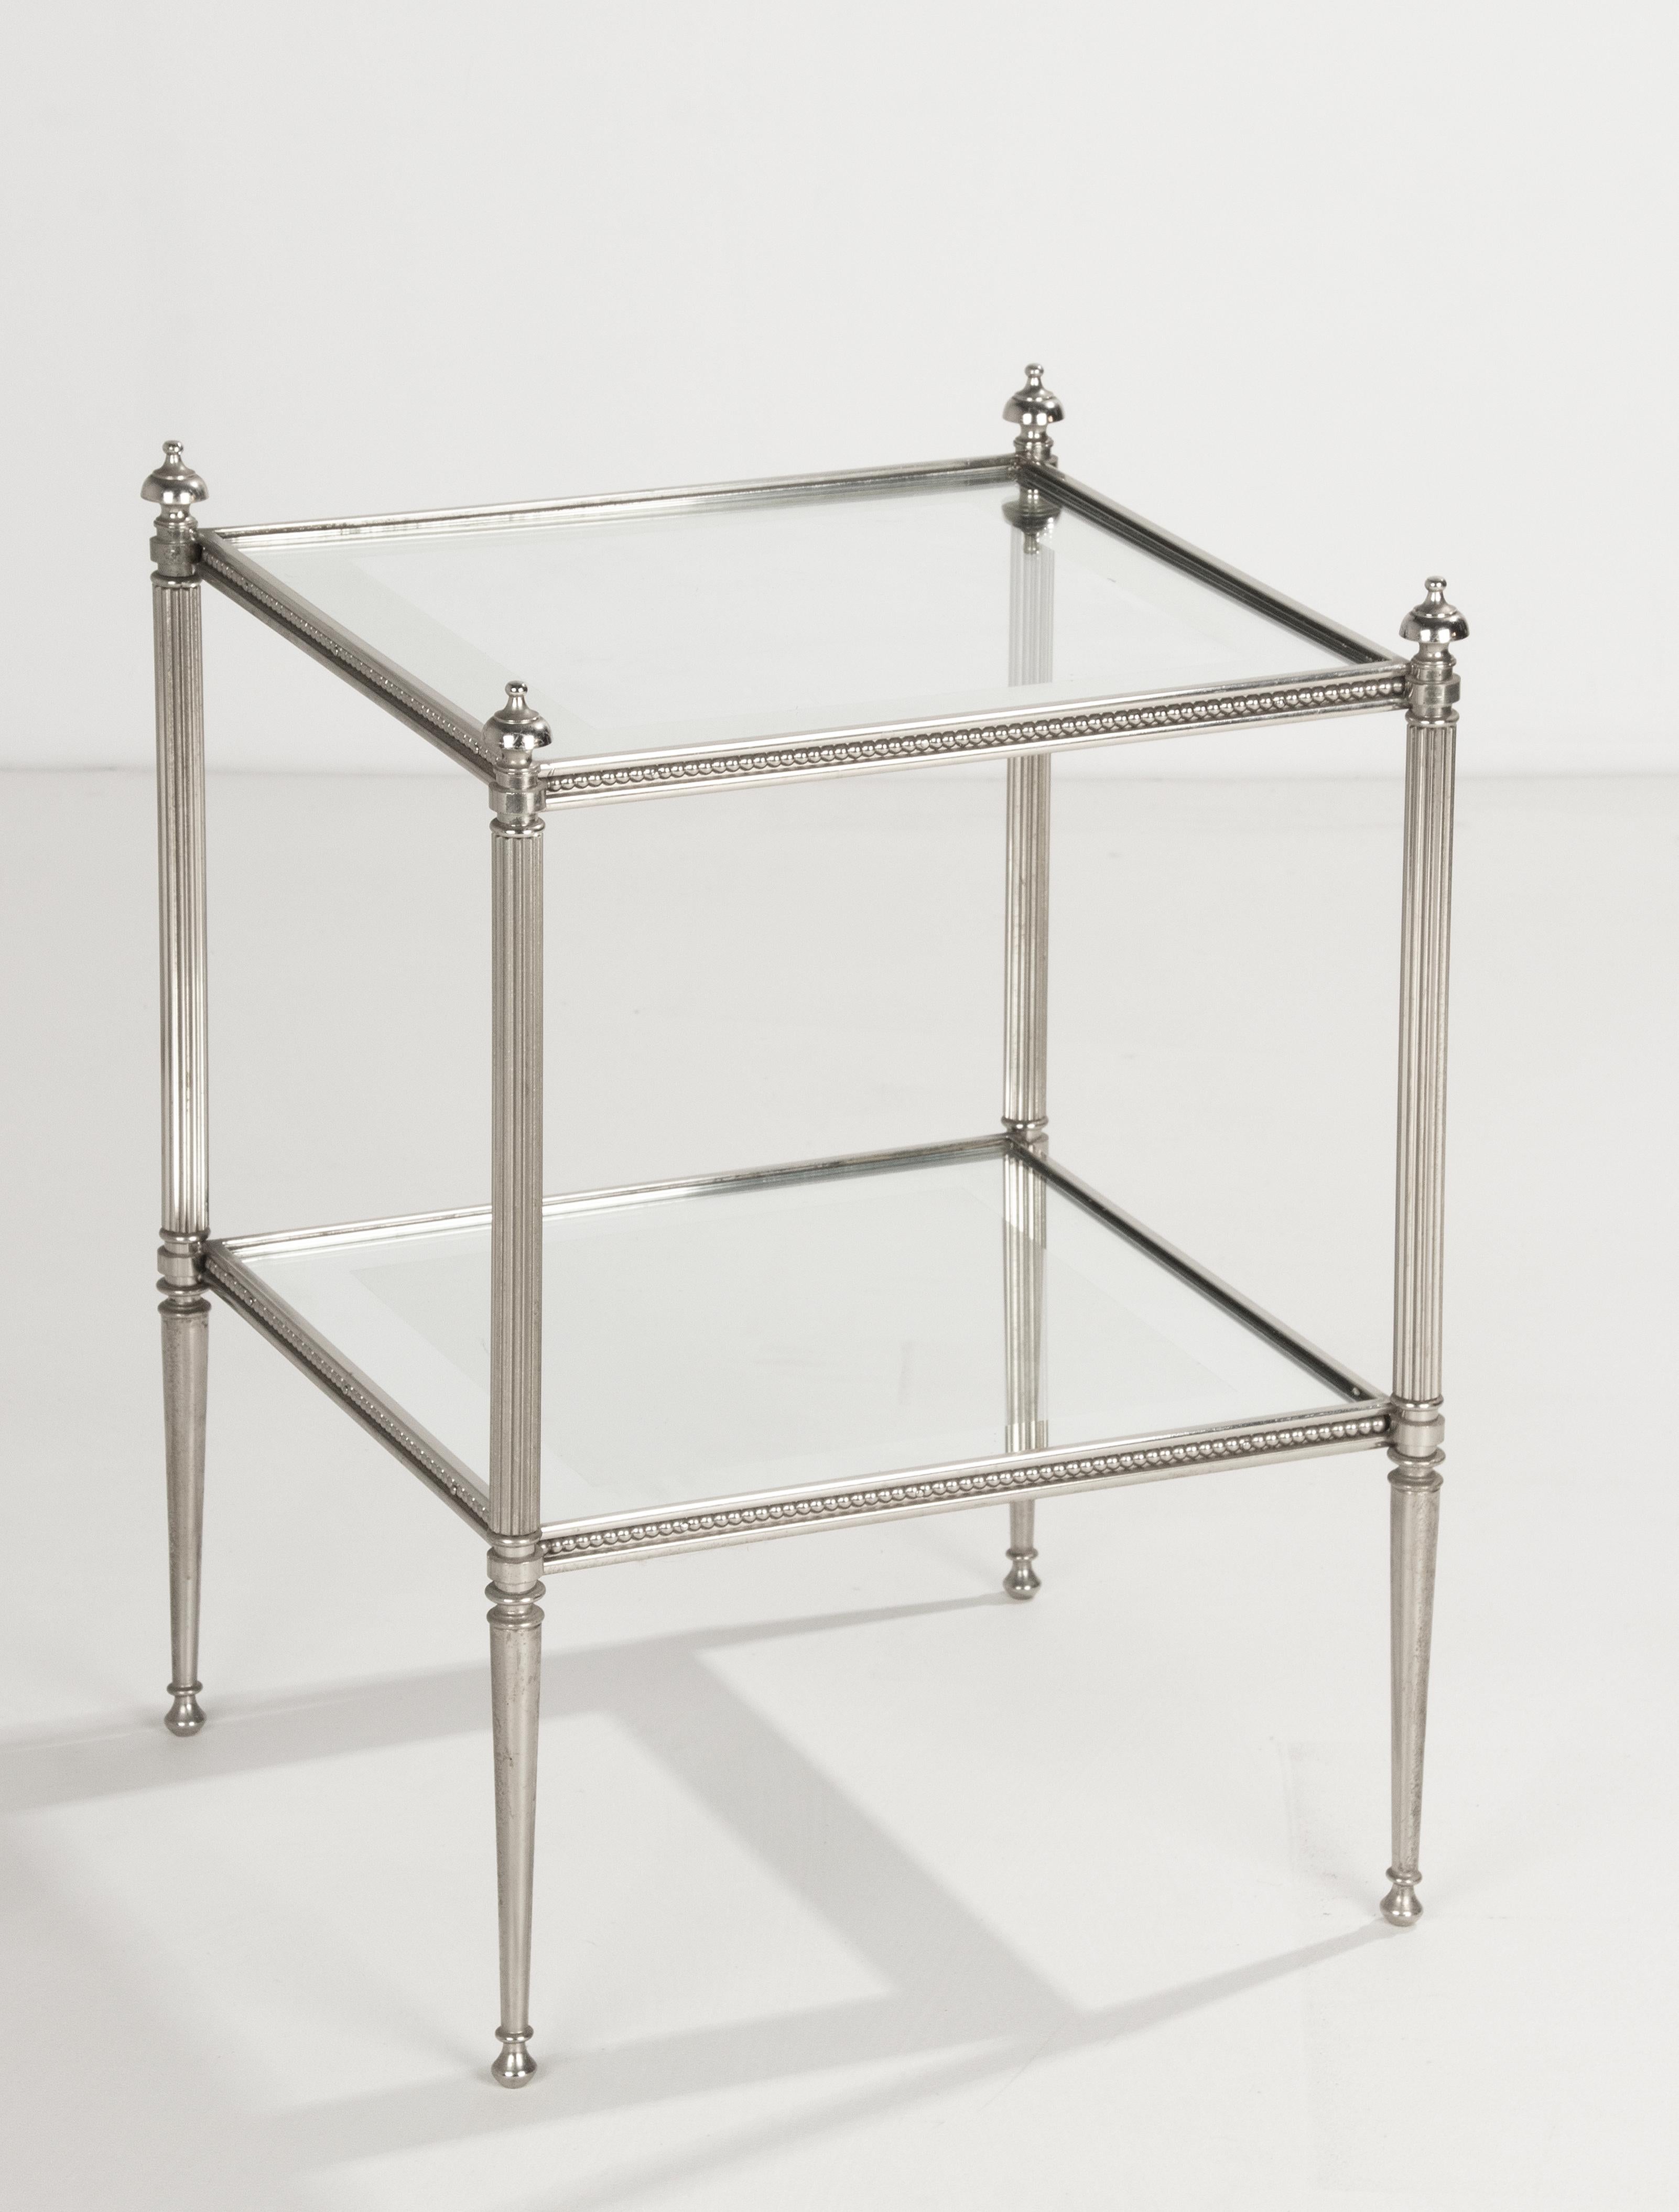 A pair of two-tier side tables made of chromed metal in neo-classical style. In the style of Maison Jansen. It has glass tops with mirrors edges. It's pretty much a pair with a few differences. The beat rim is slightly larger, the feet are slightly